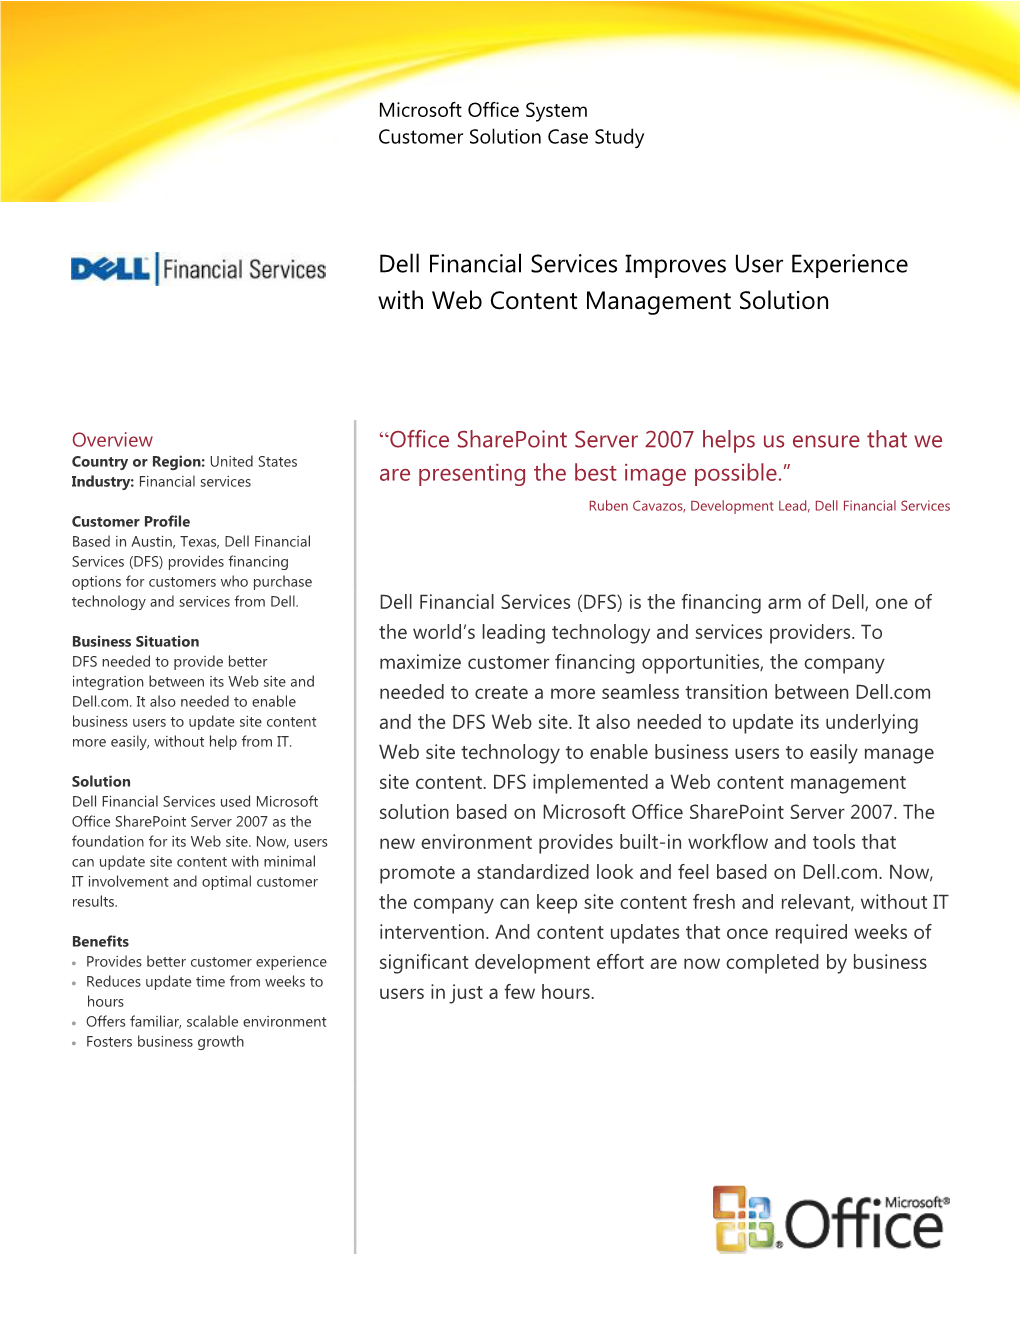 Dell Financial Services (DFS) Provides Financing Solutions for Customers Who Purchase Dell